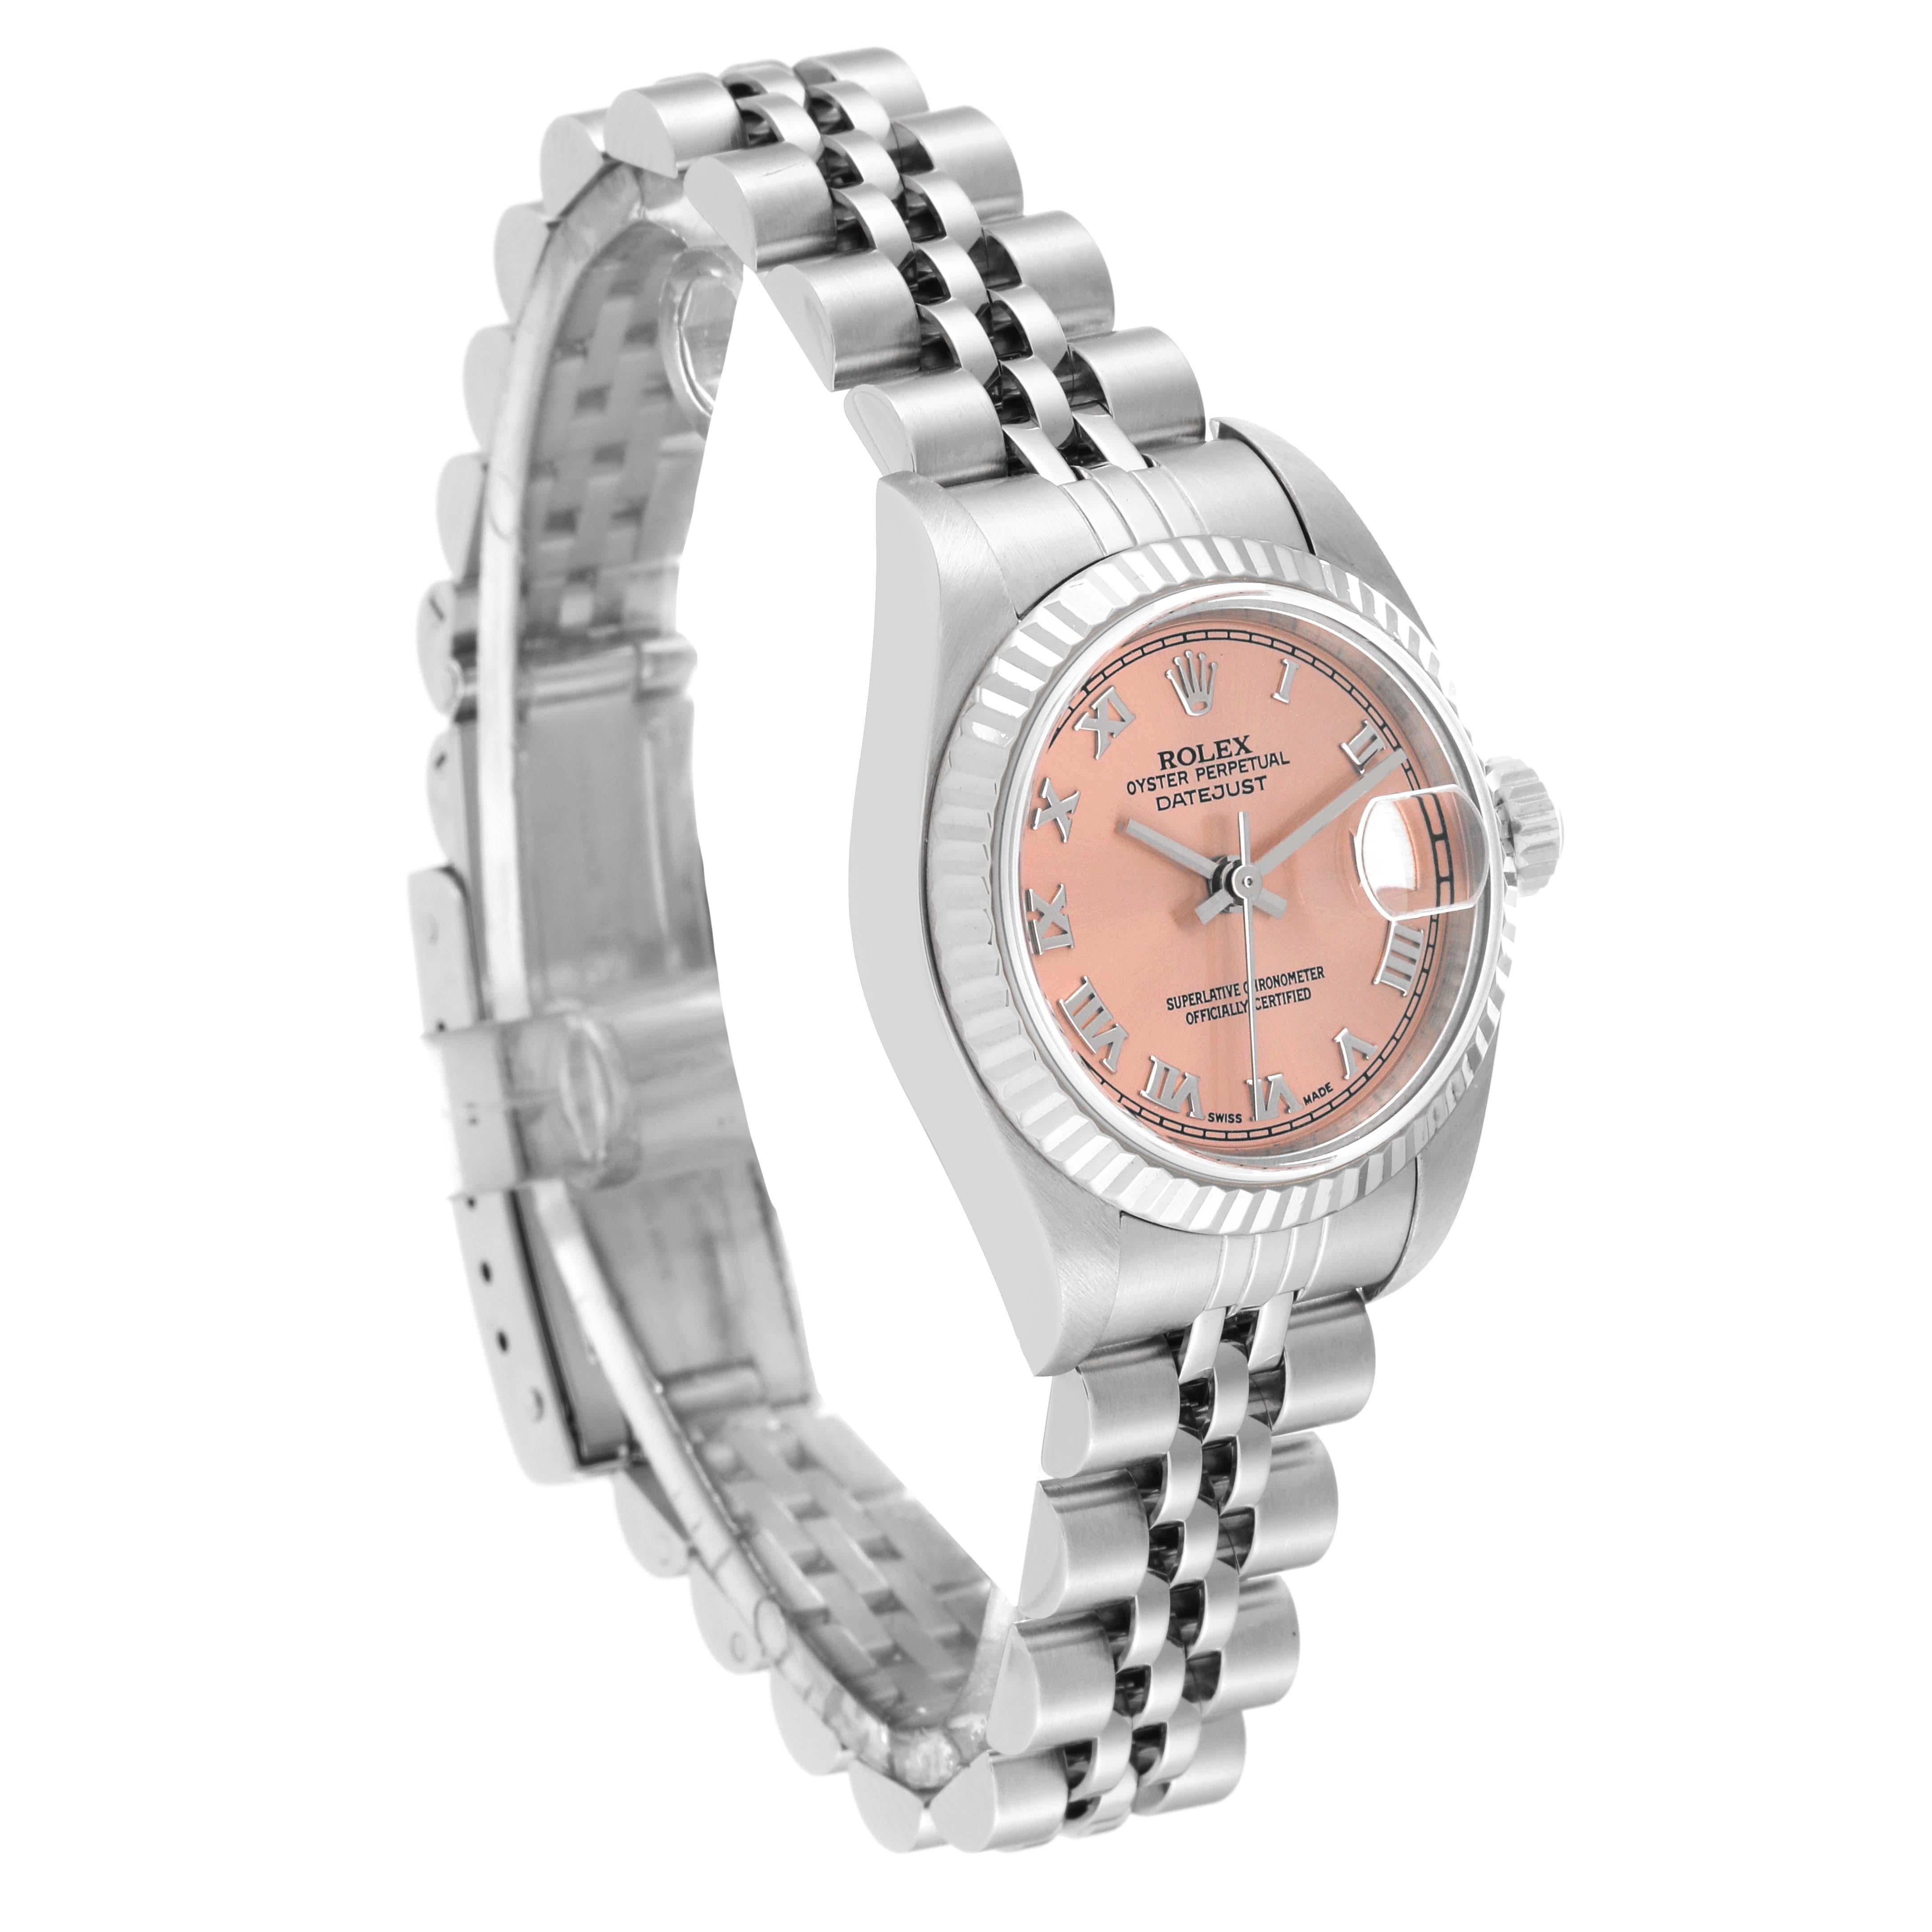 Rolex Datejust Salmon Dial White Gold Steel Ladies Watch 79174 In Good Condition For Sale In Atlanta, GA